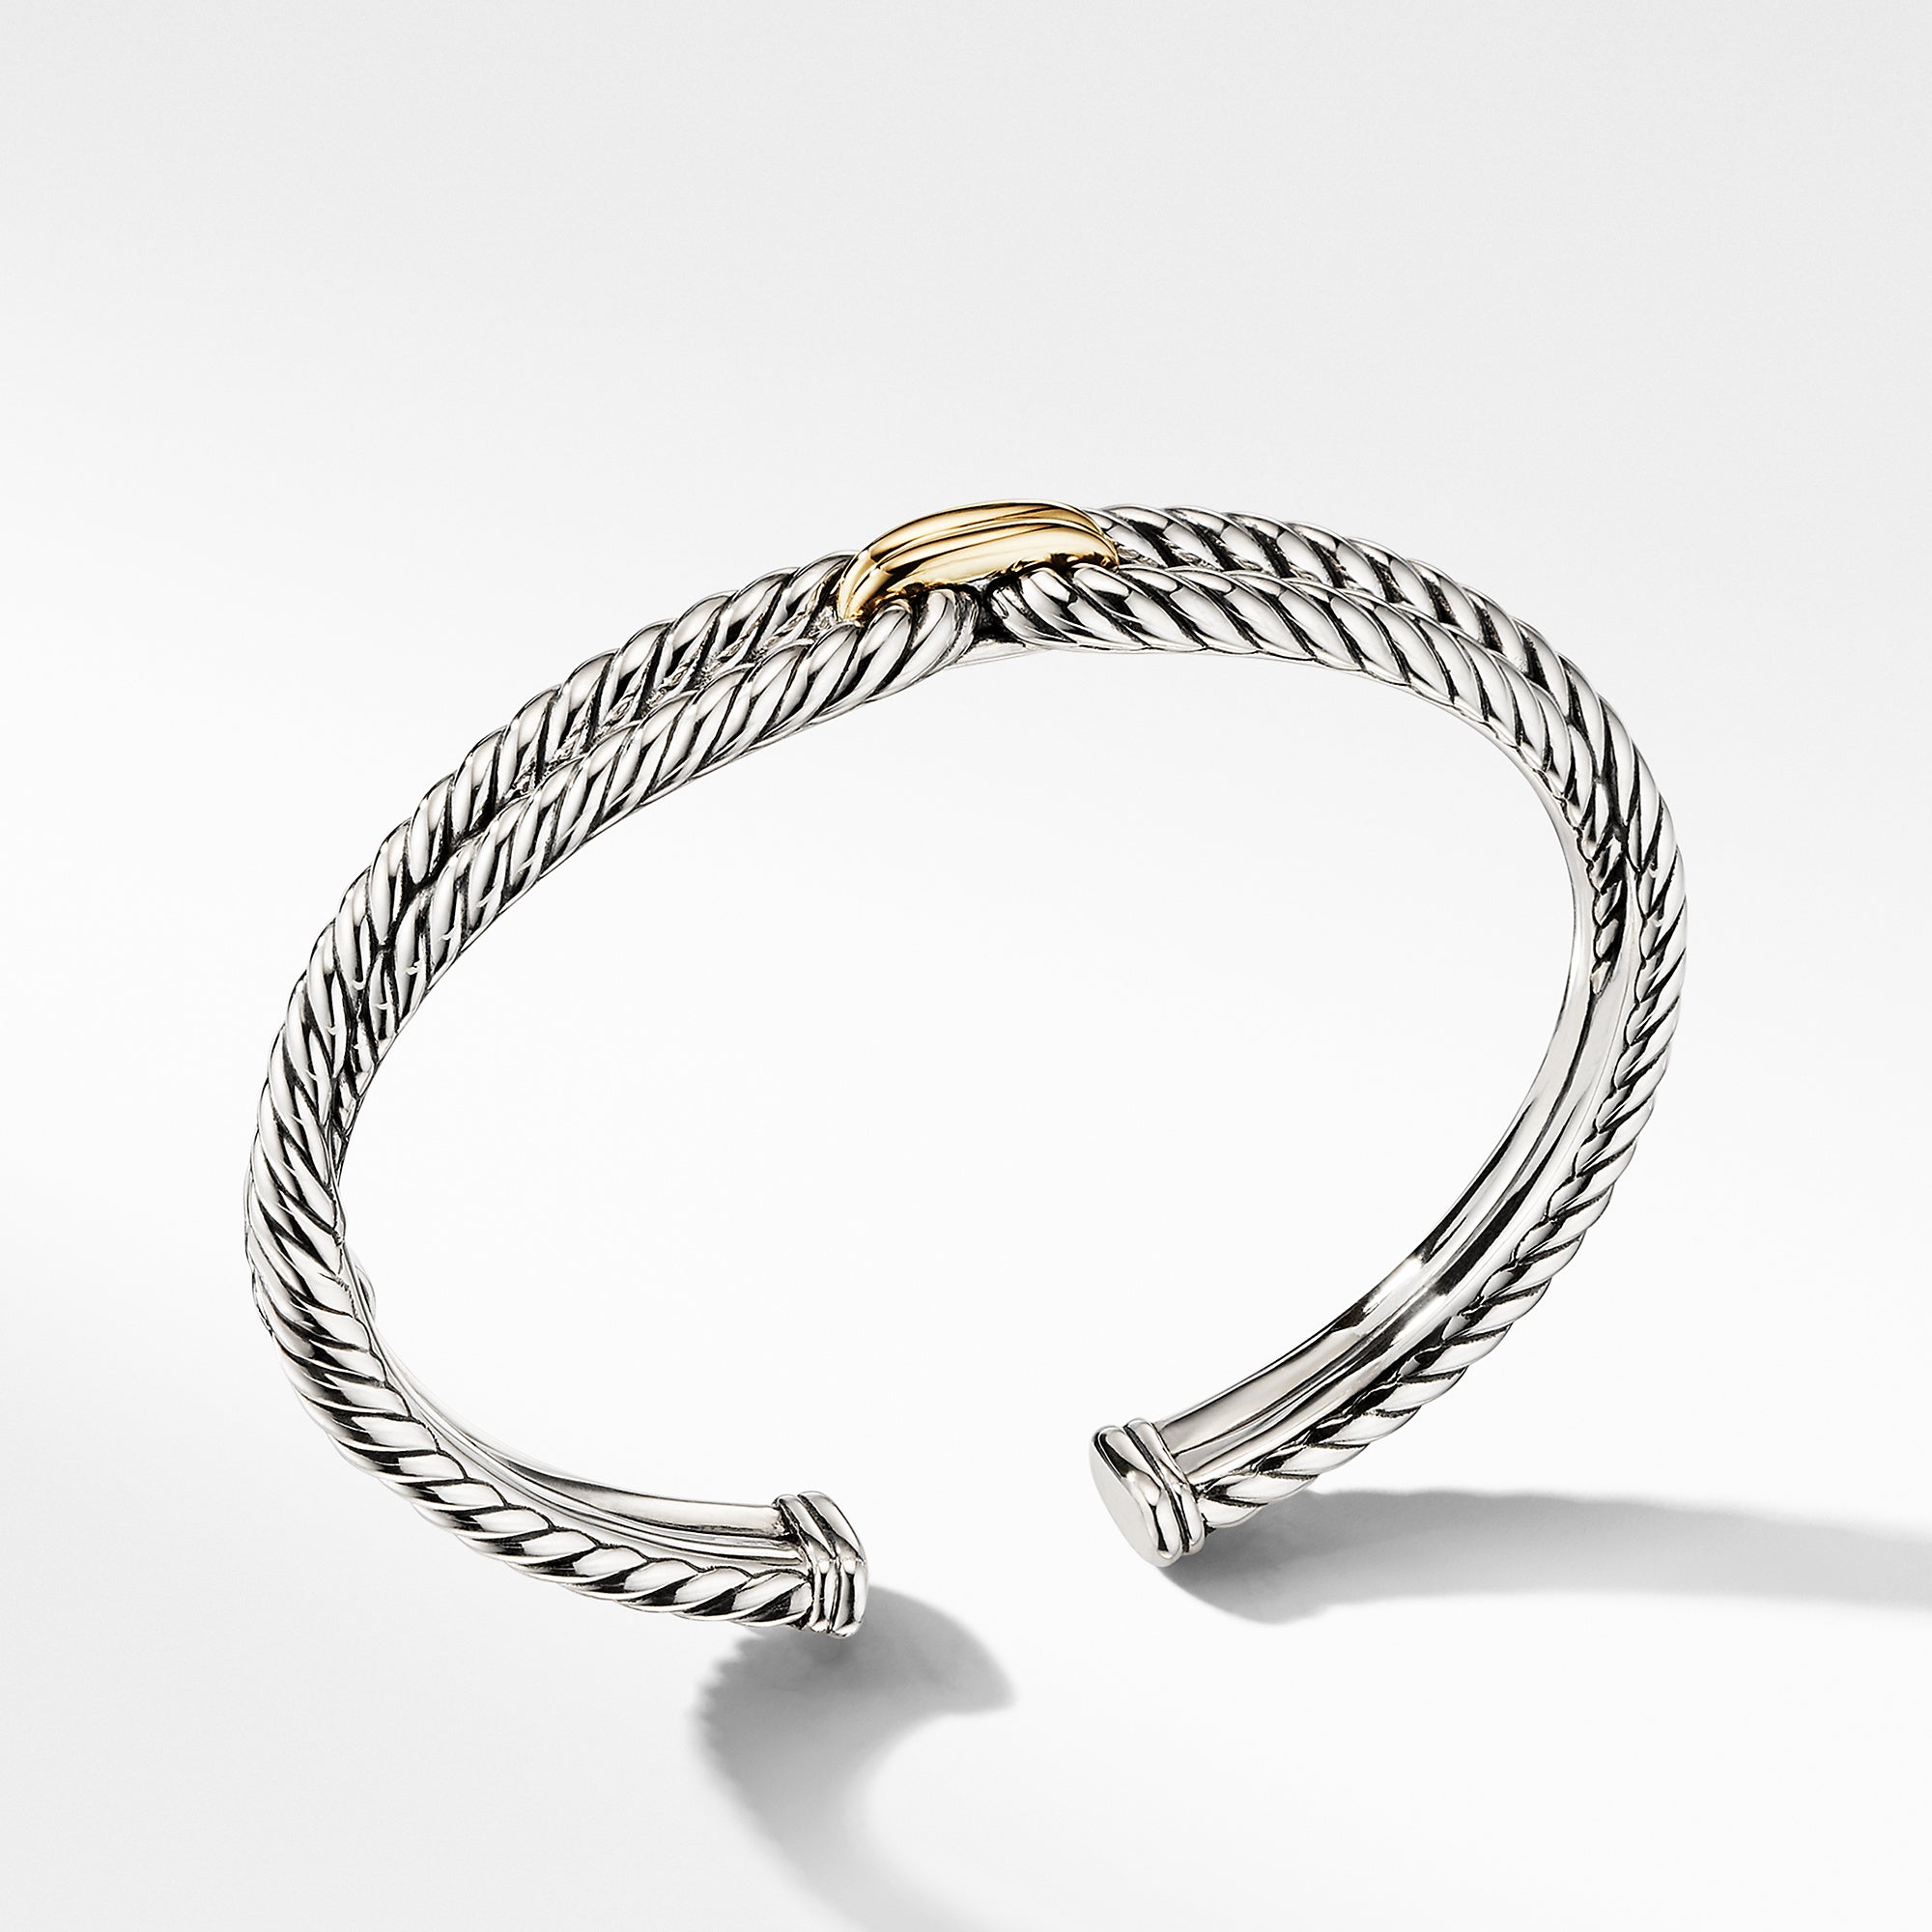 Infinity Link Cord Bracelet in Black Nylon with 18K Yellow Gold, 9mm